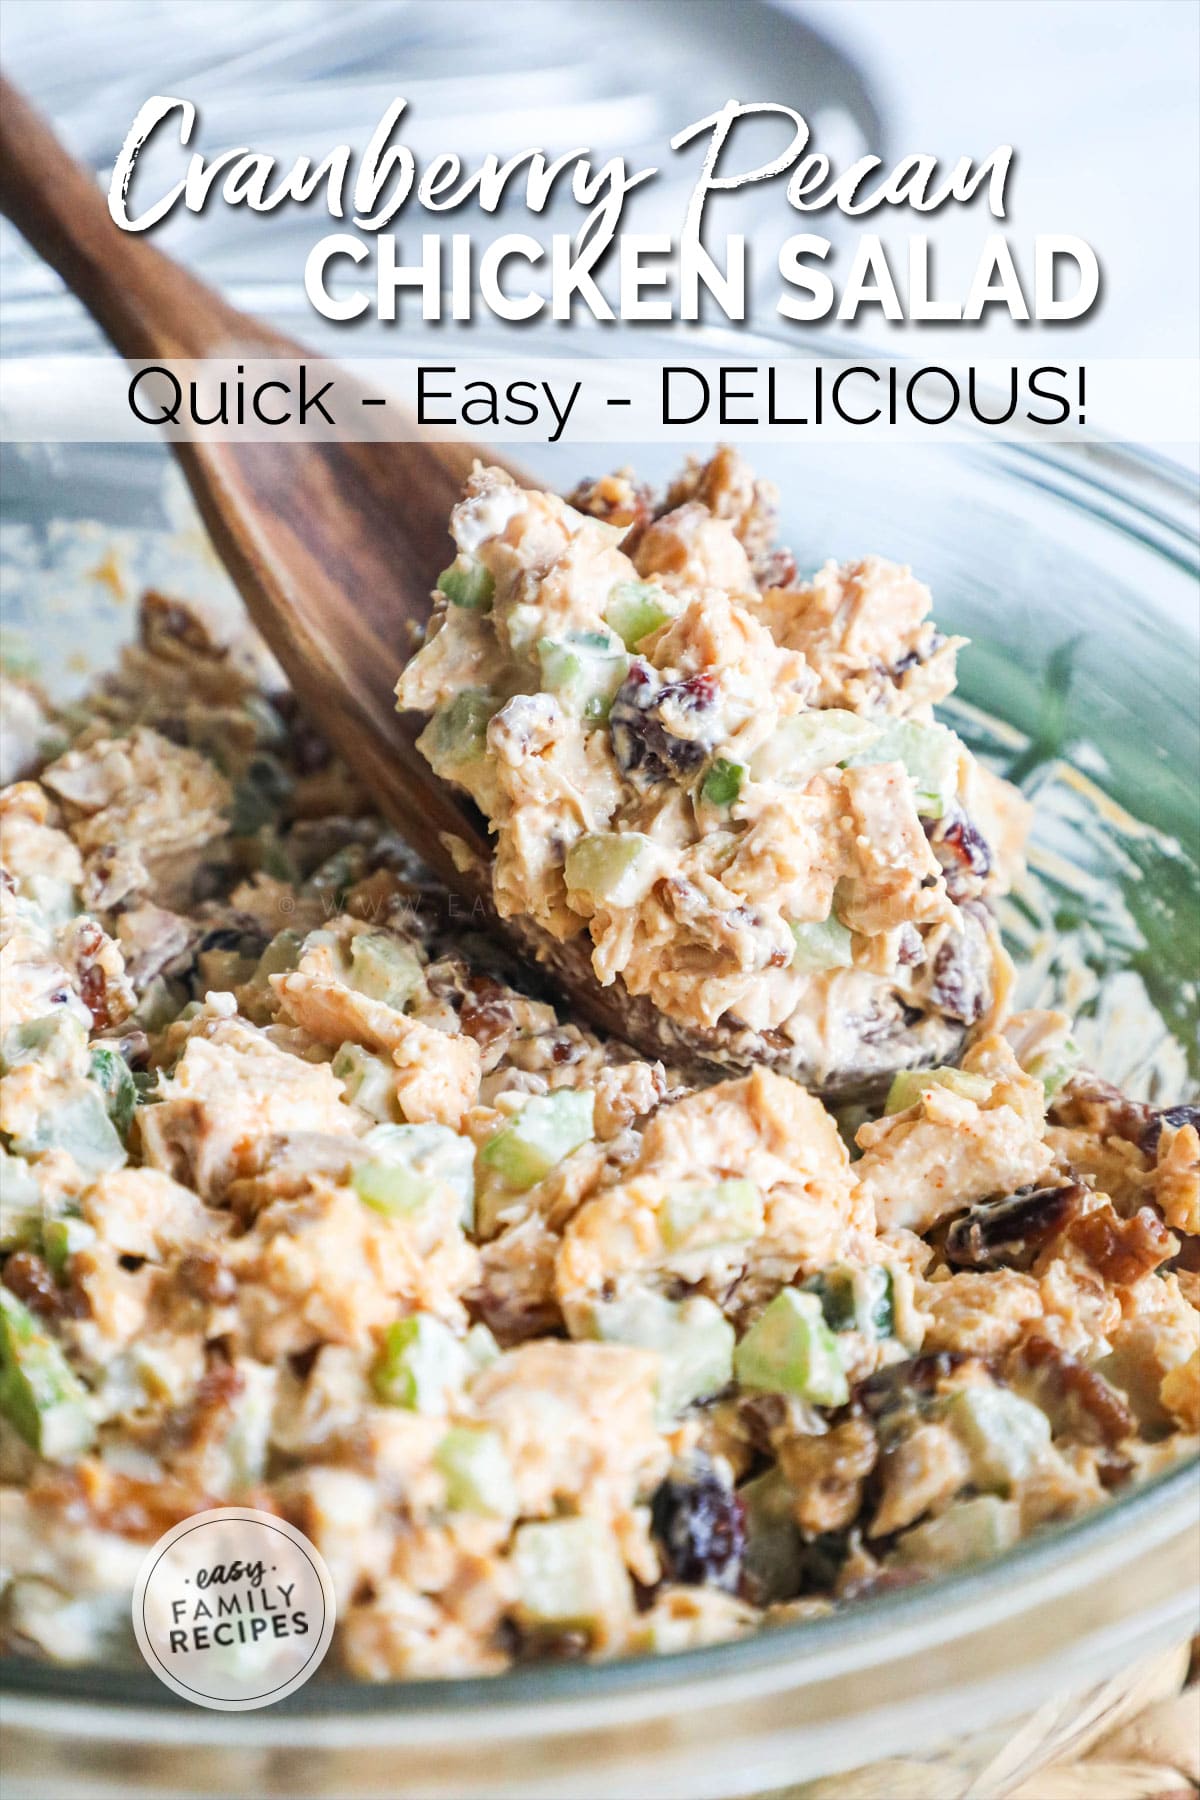 Lifting a spoonful of Cranberry Pecan Chicken salad from the bowl